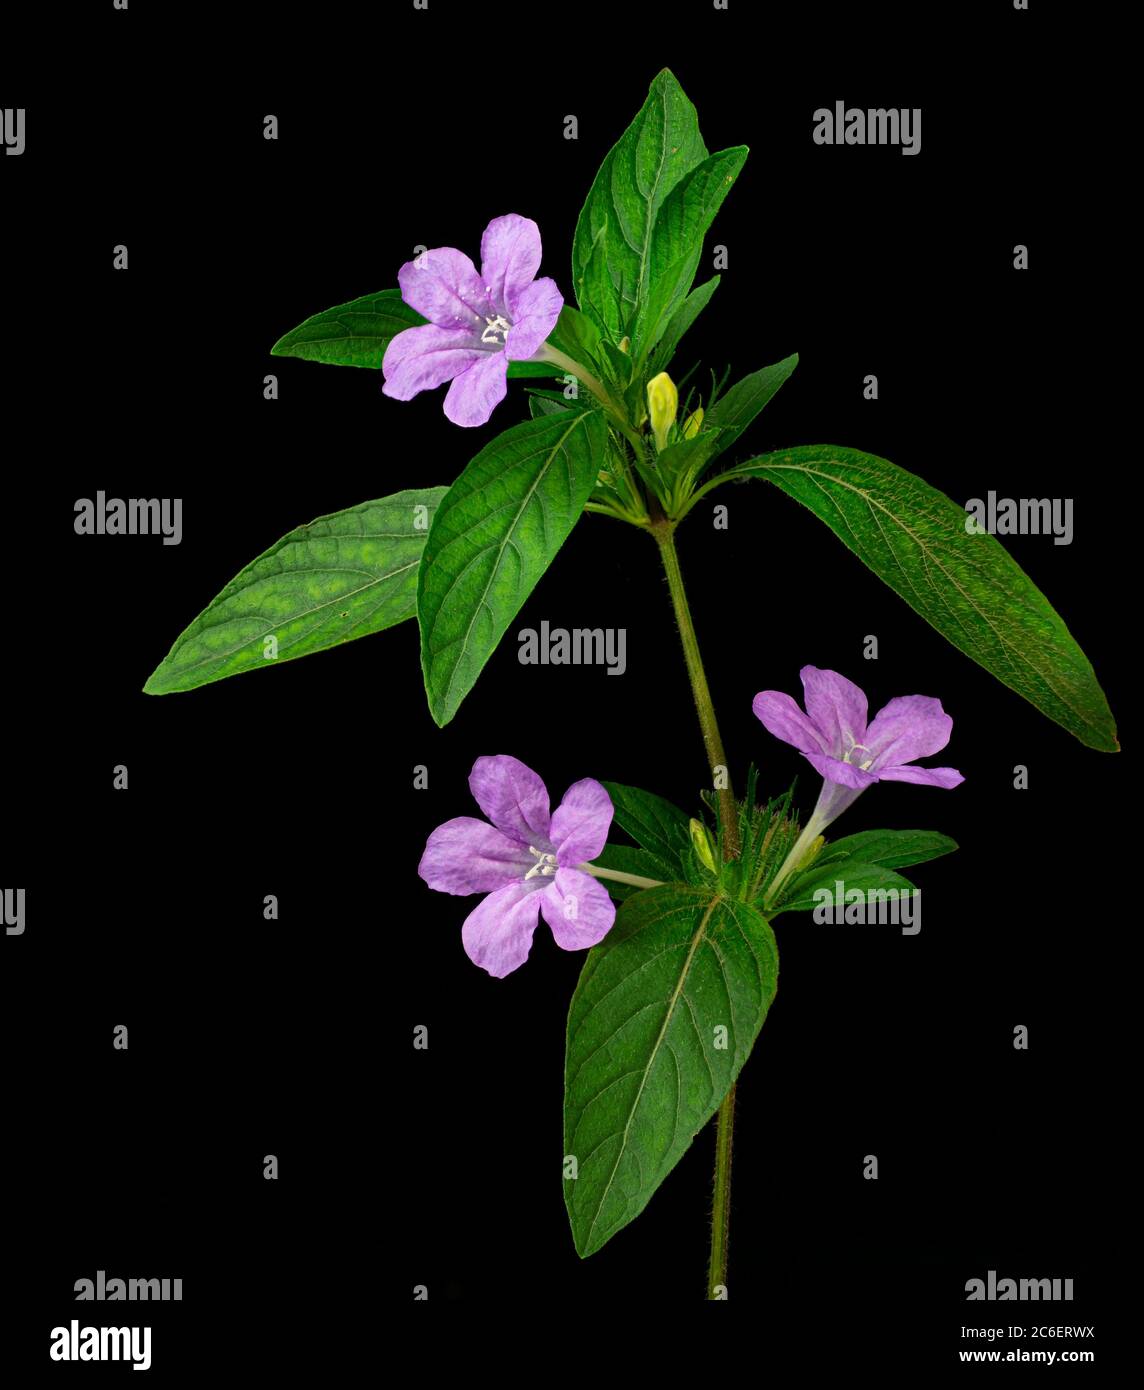 Flowers and flower bud of wild petunia (Ruellia humilis), a perrenial plant native to North America. Stock Photo